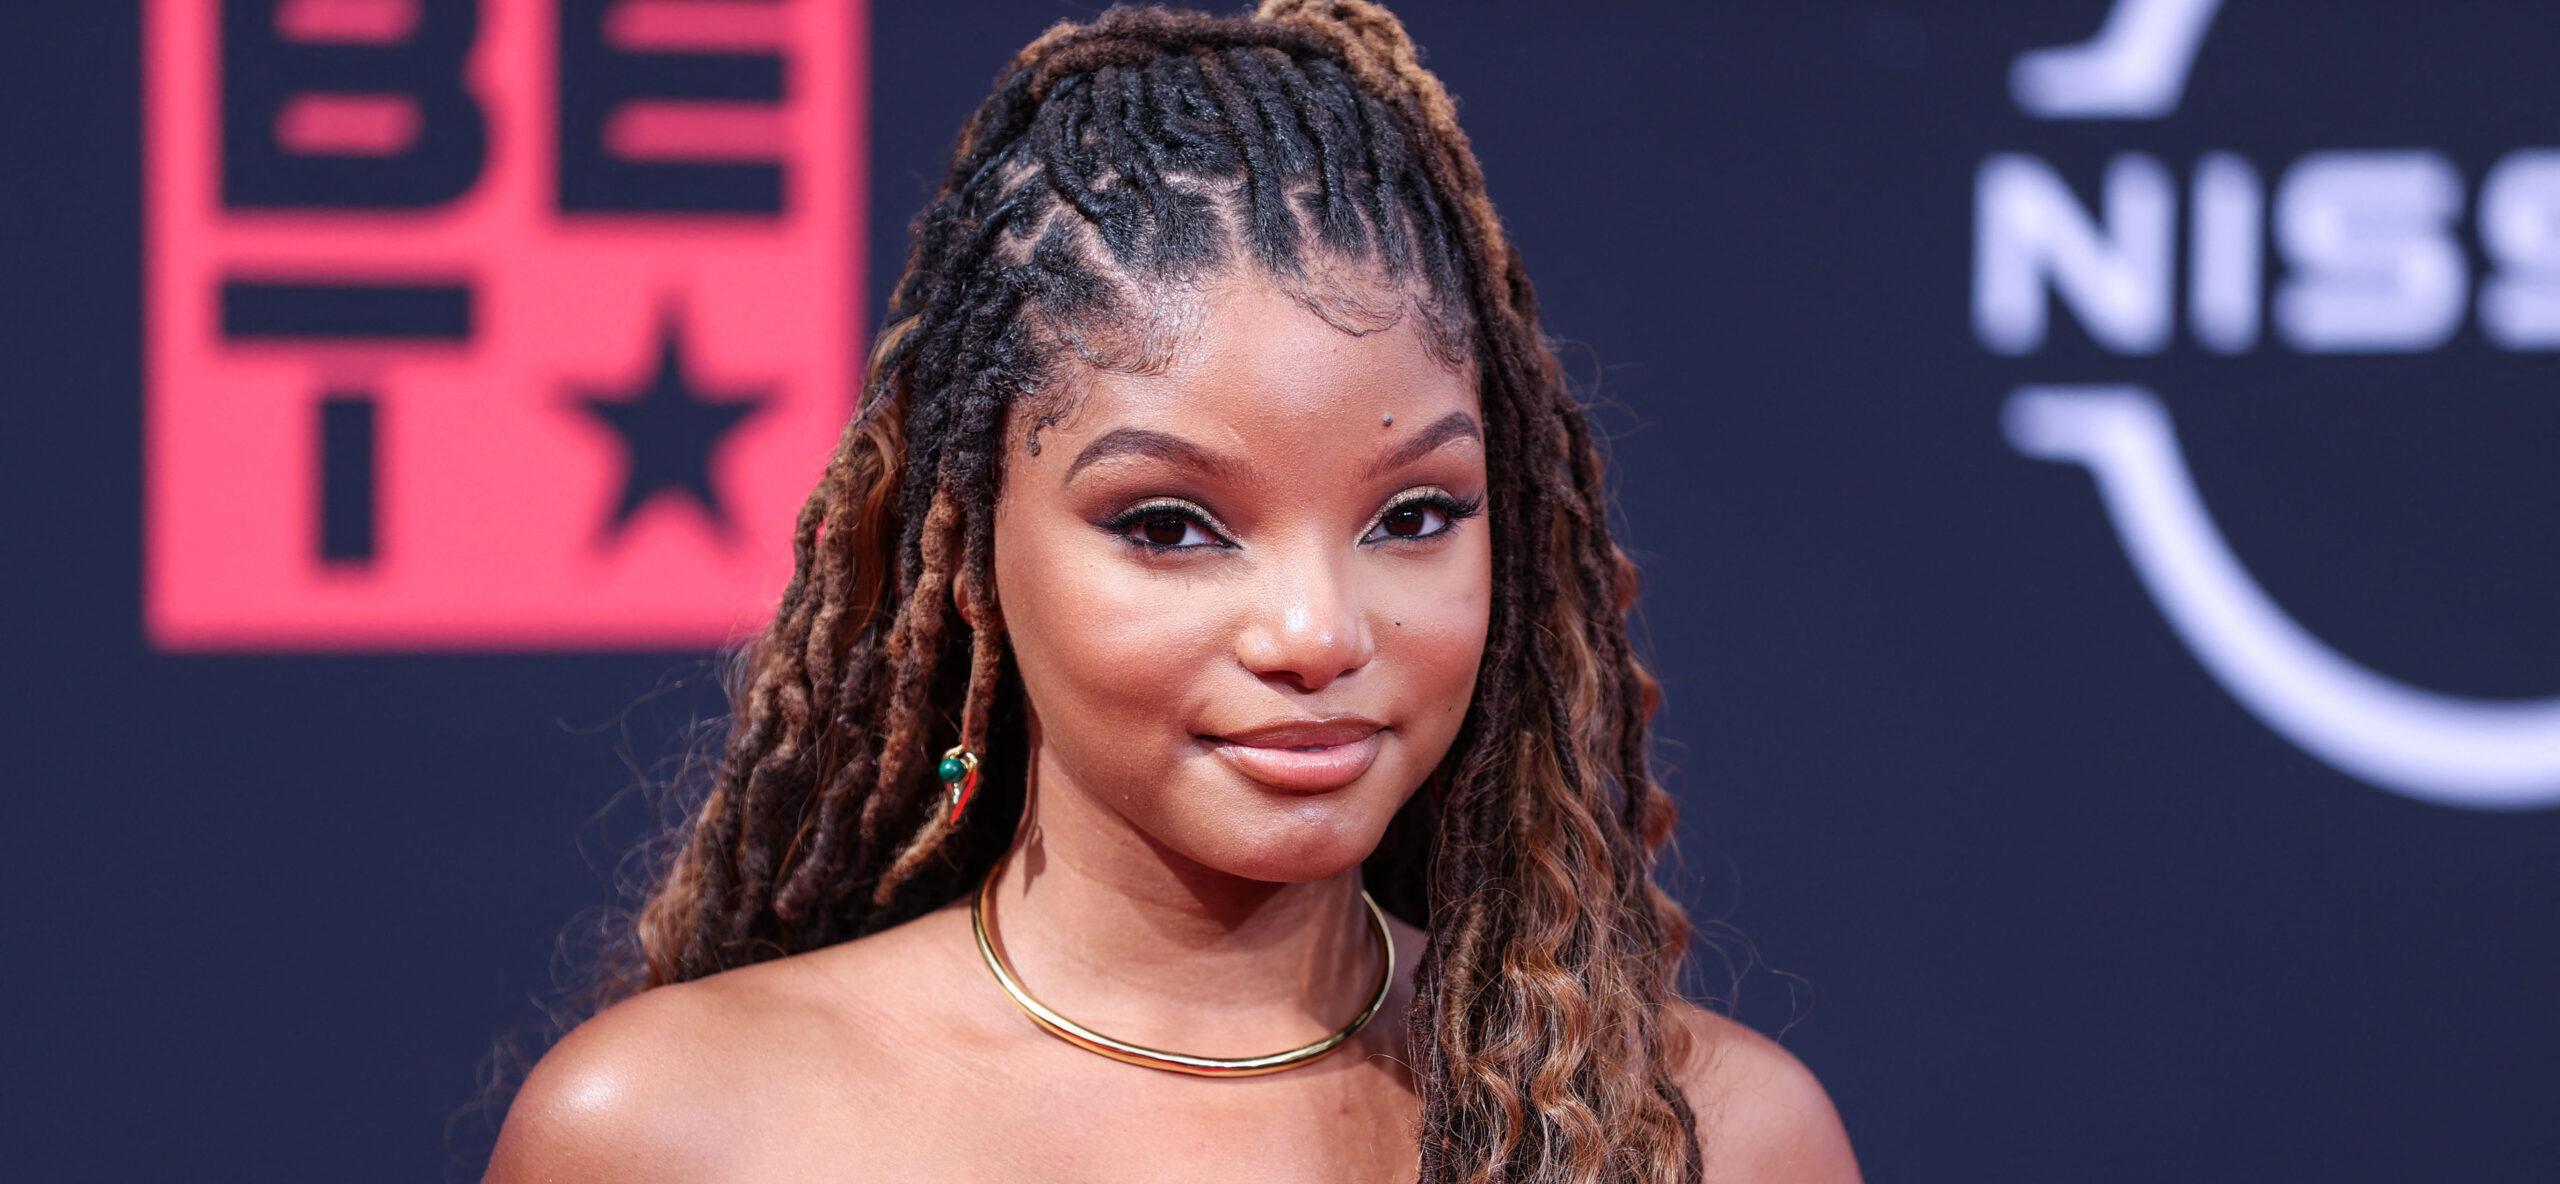 Halle Bailey's Latest Pictures Seemingly Squashes Pregnancy Rumors